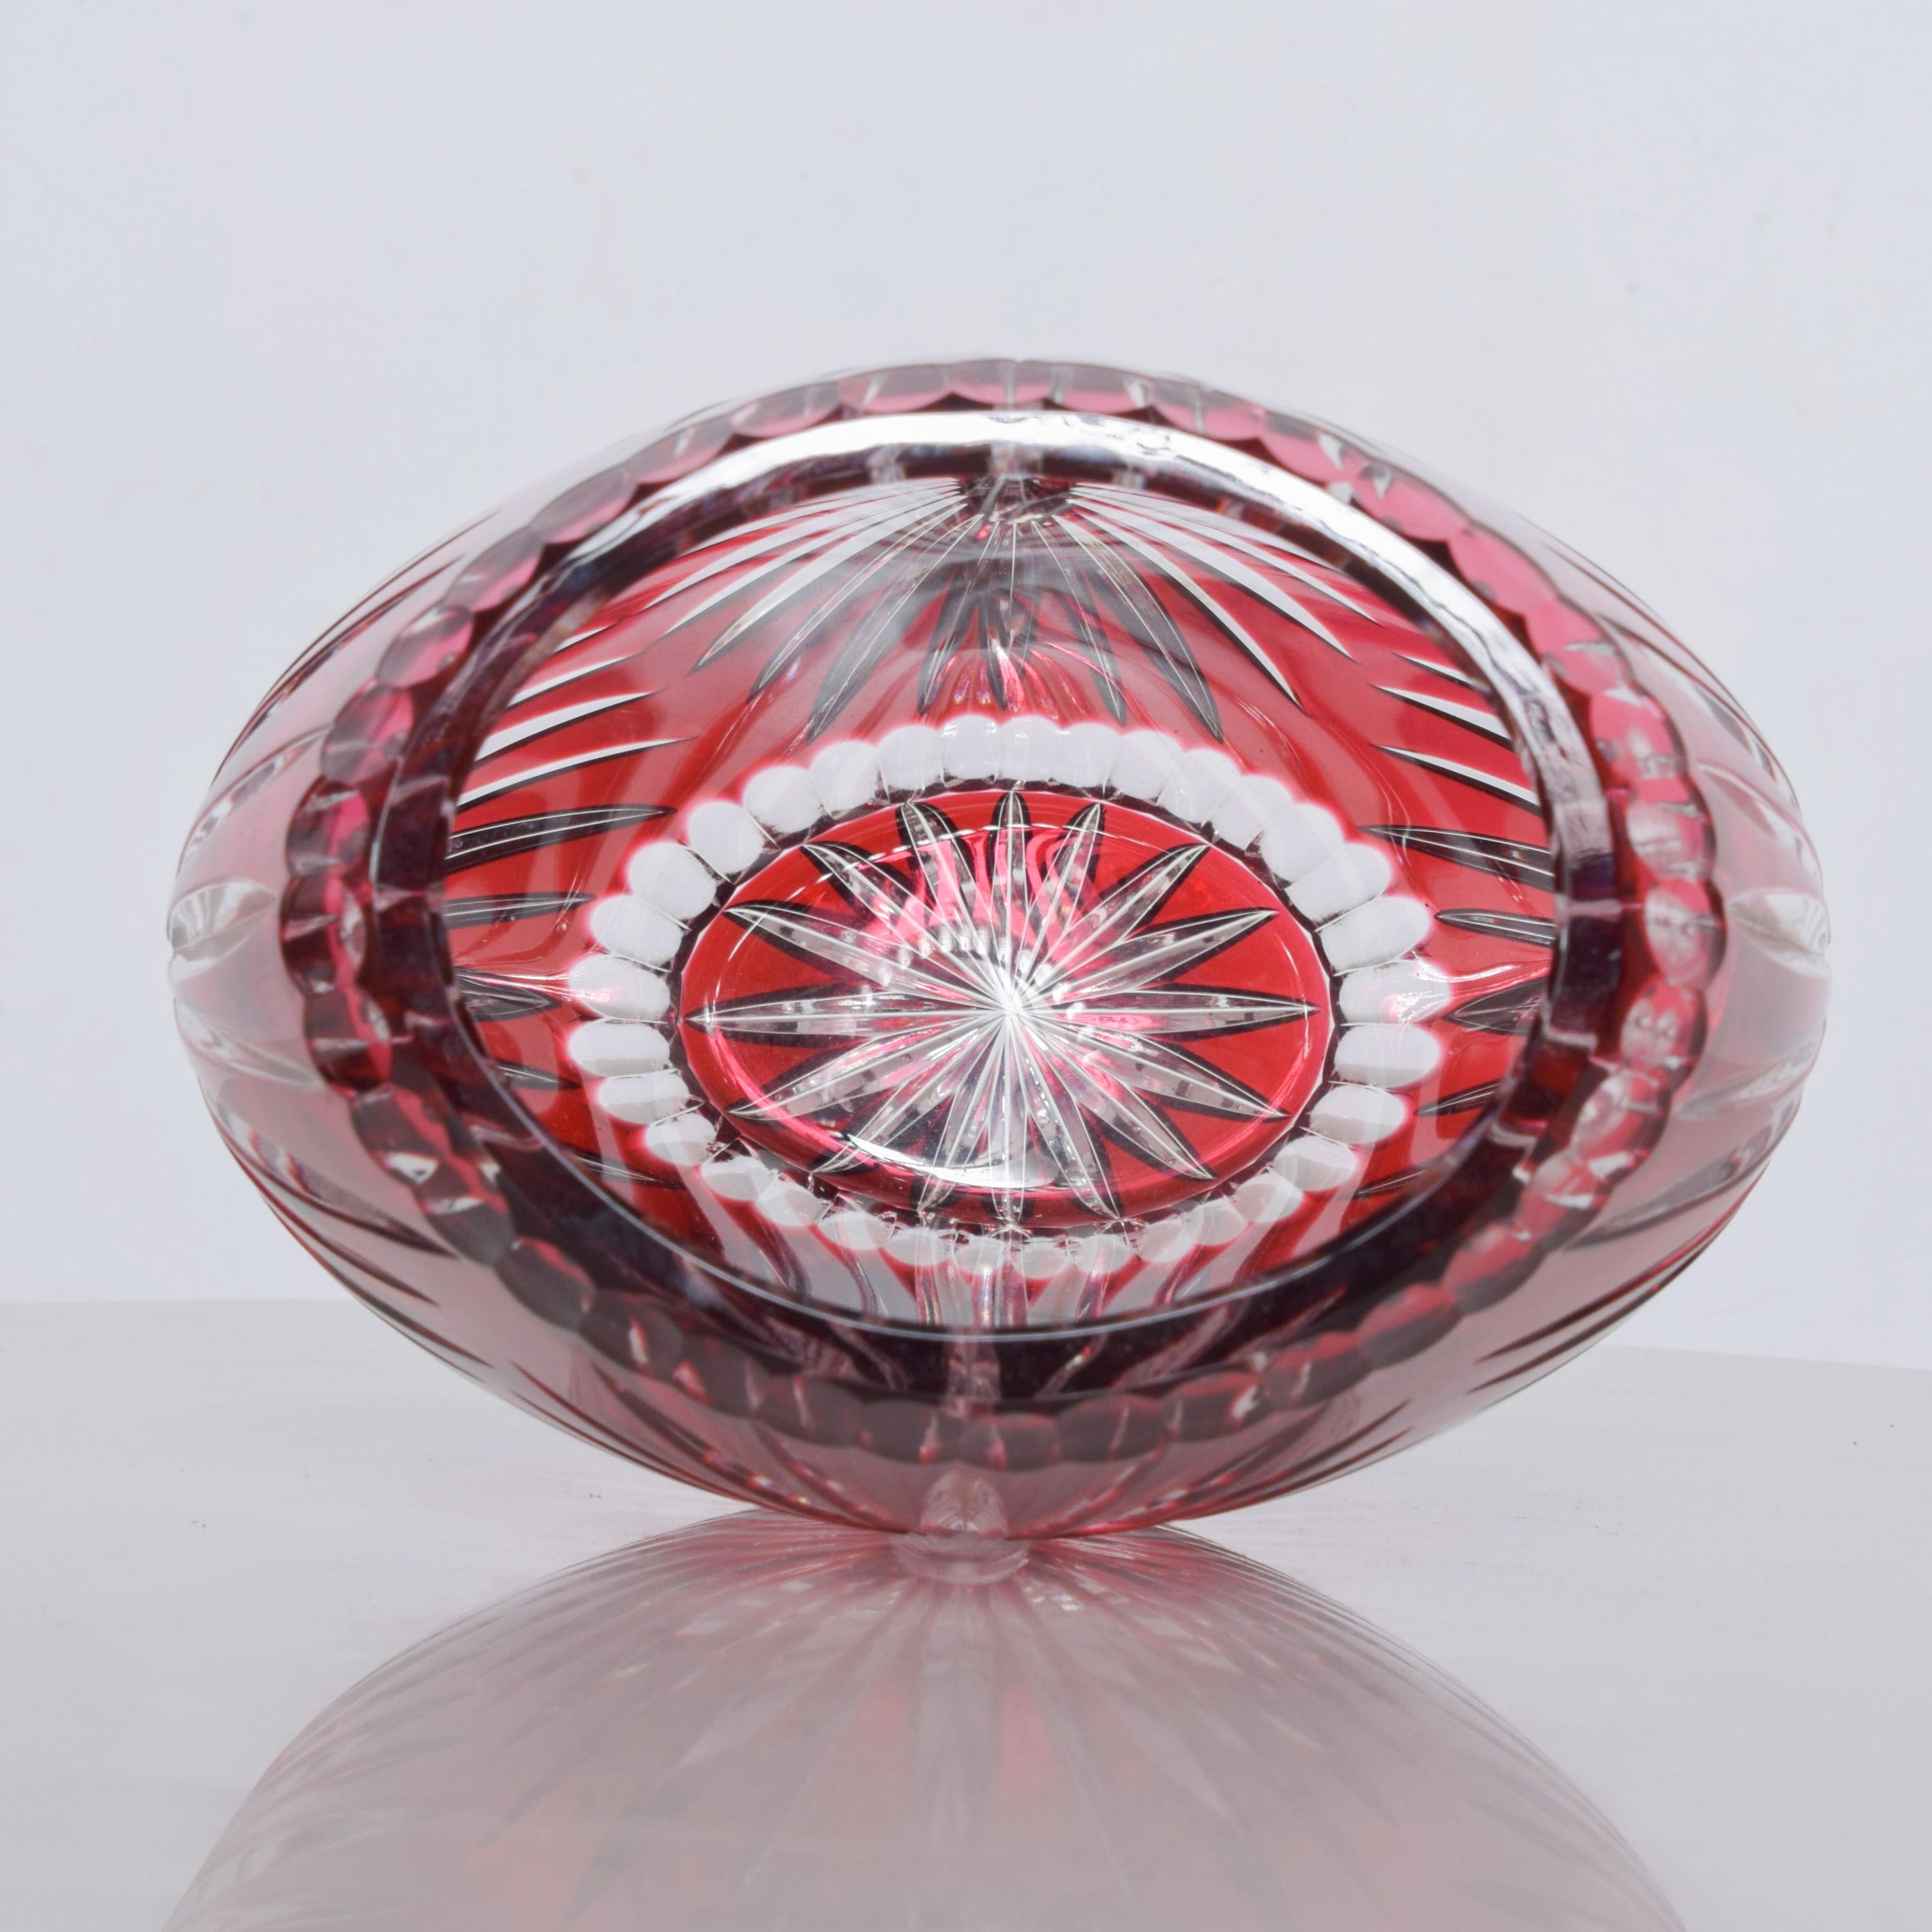 Bohemian Red Ruby Cut Clear Crystal Glass Vase Hungary Czech Art Style of Ajka 2